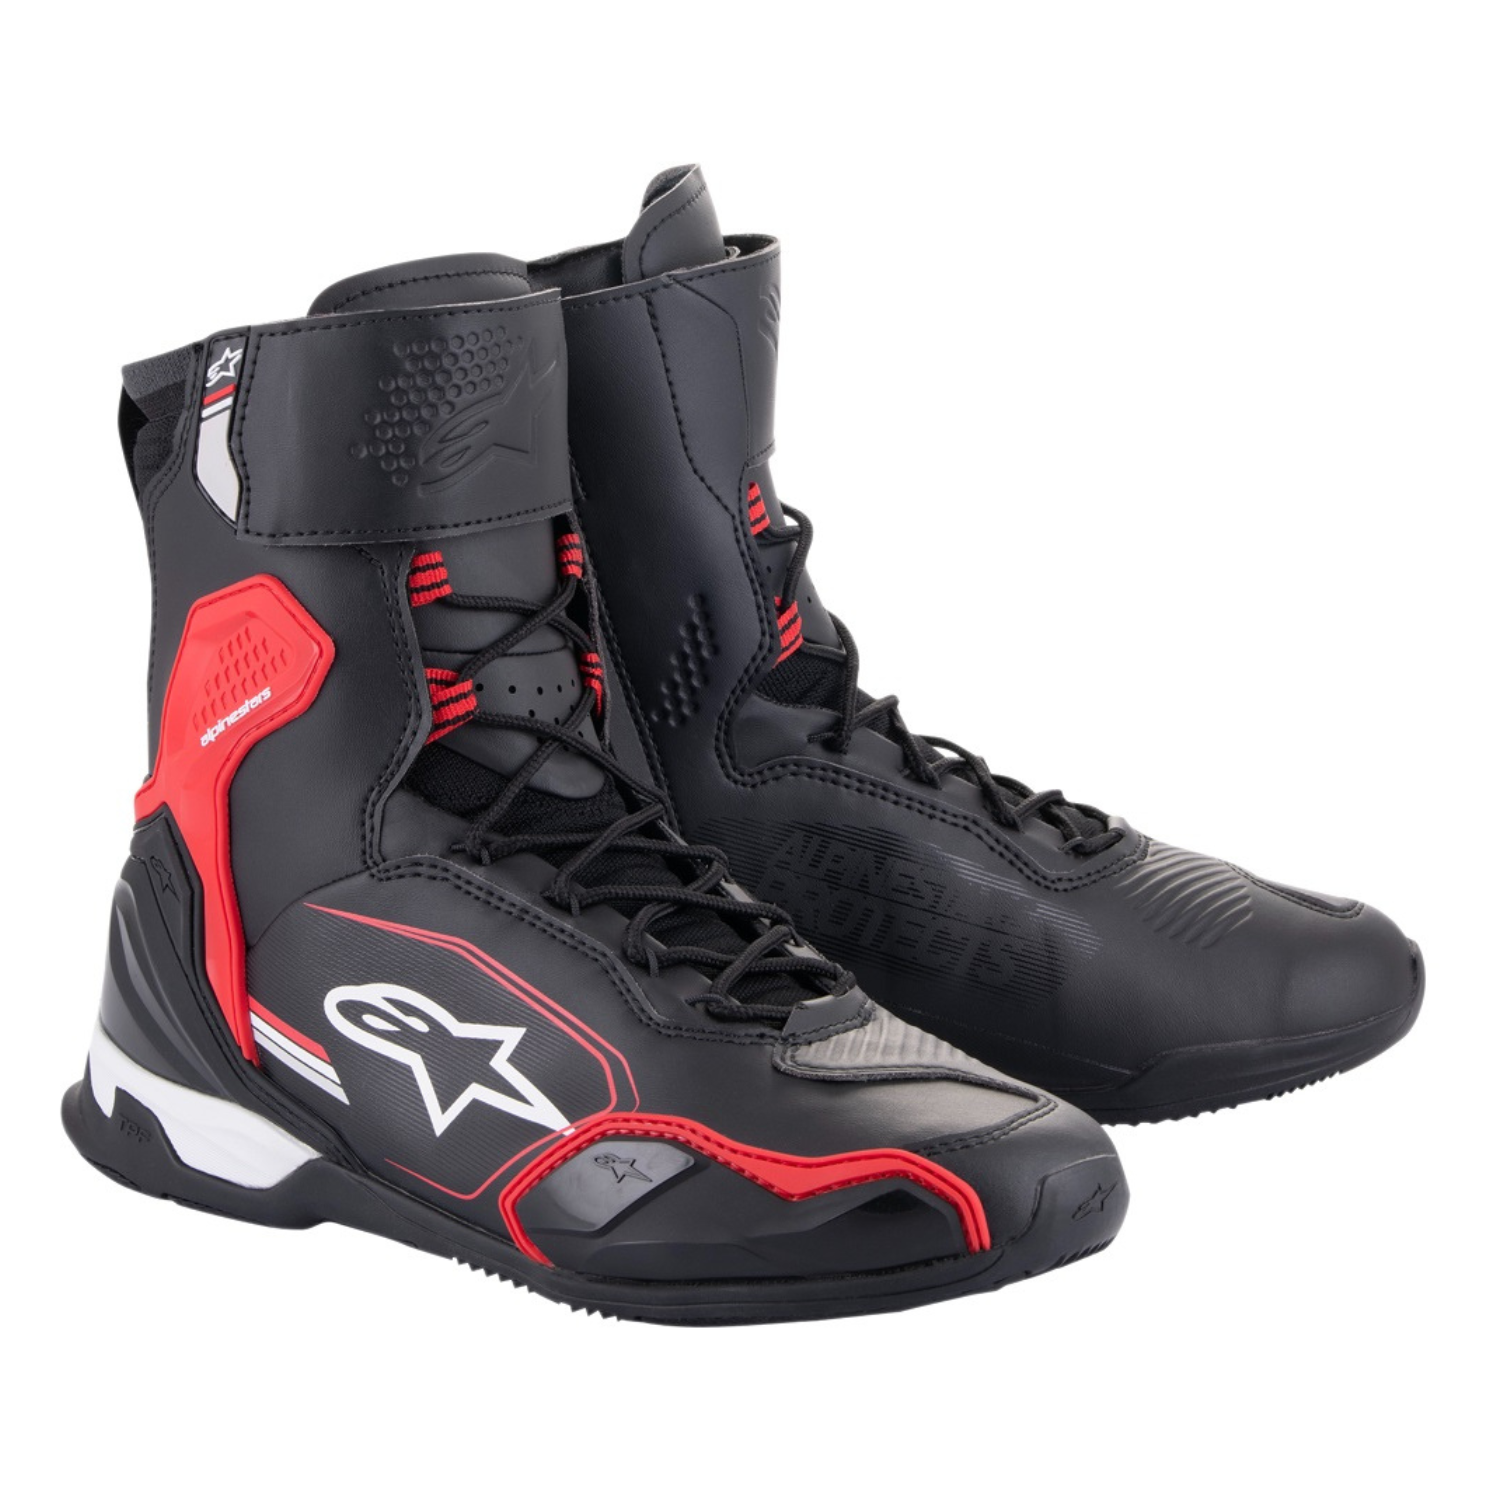 Image of Alpinestars Superfaster Shoes Black Bright Red White Size US 13 ID 8059347261034